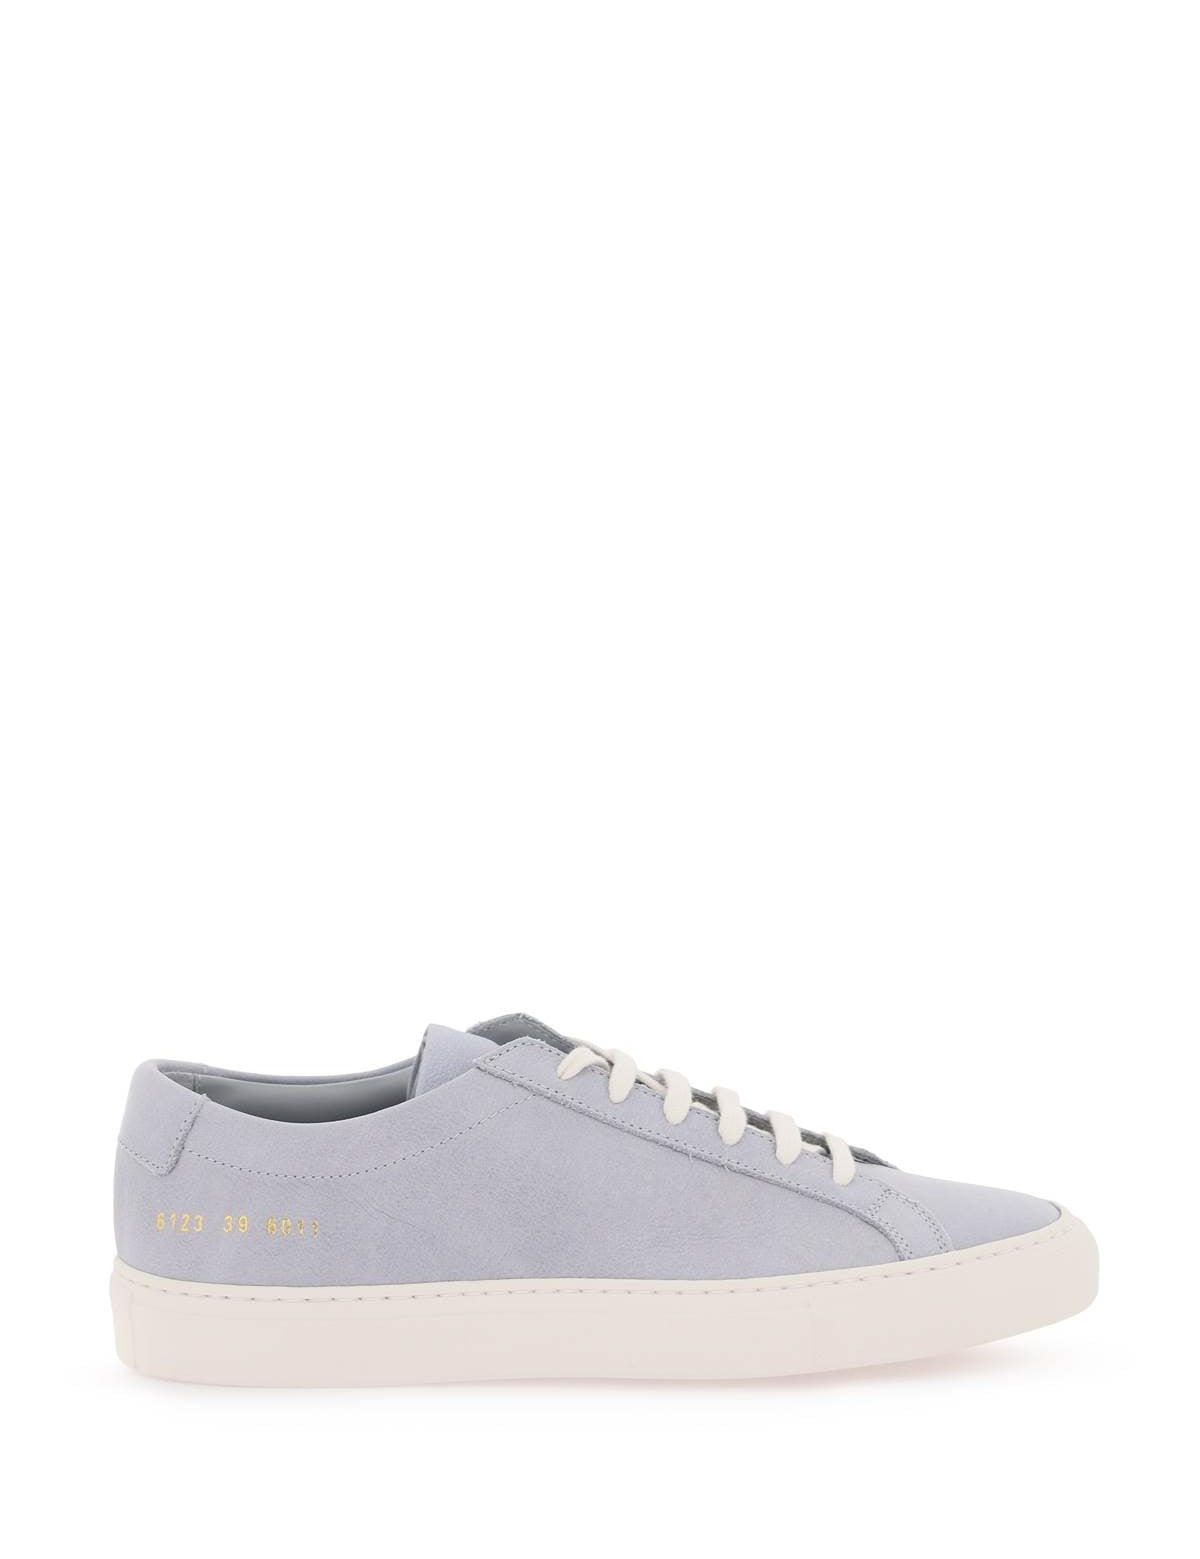 common-projects-original-achilles-leather-sneakers.jpg